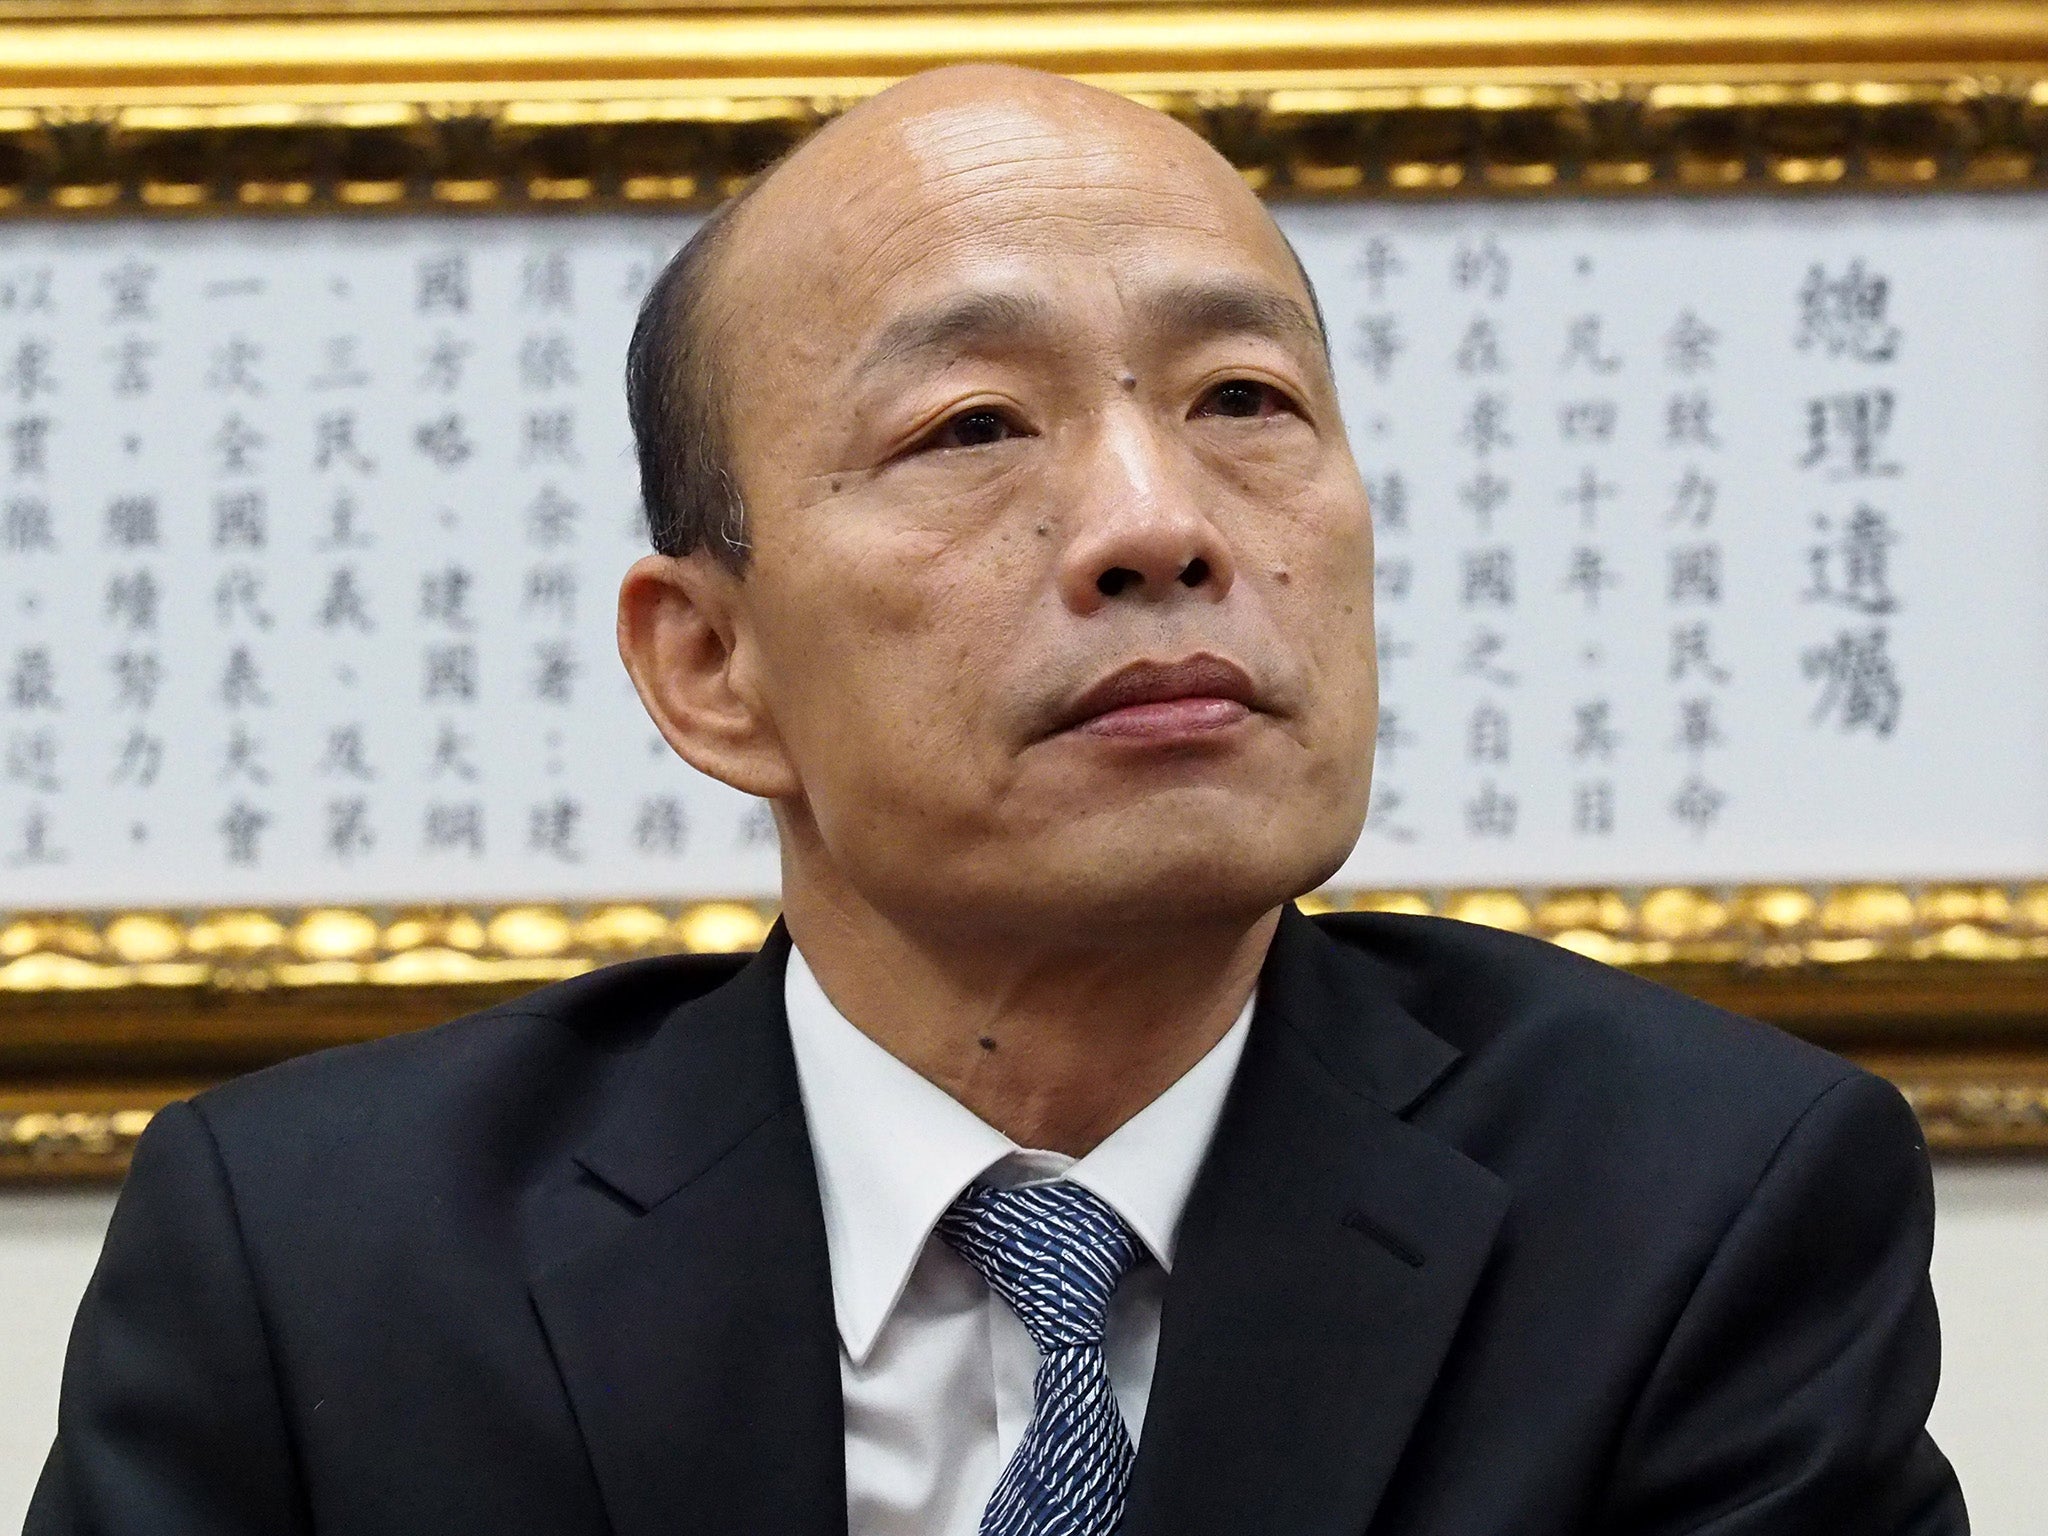 Han Kuo-Yu of the opposition Kuomintang party has denied taking payments from China